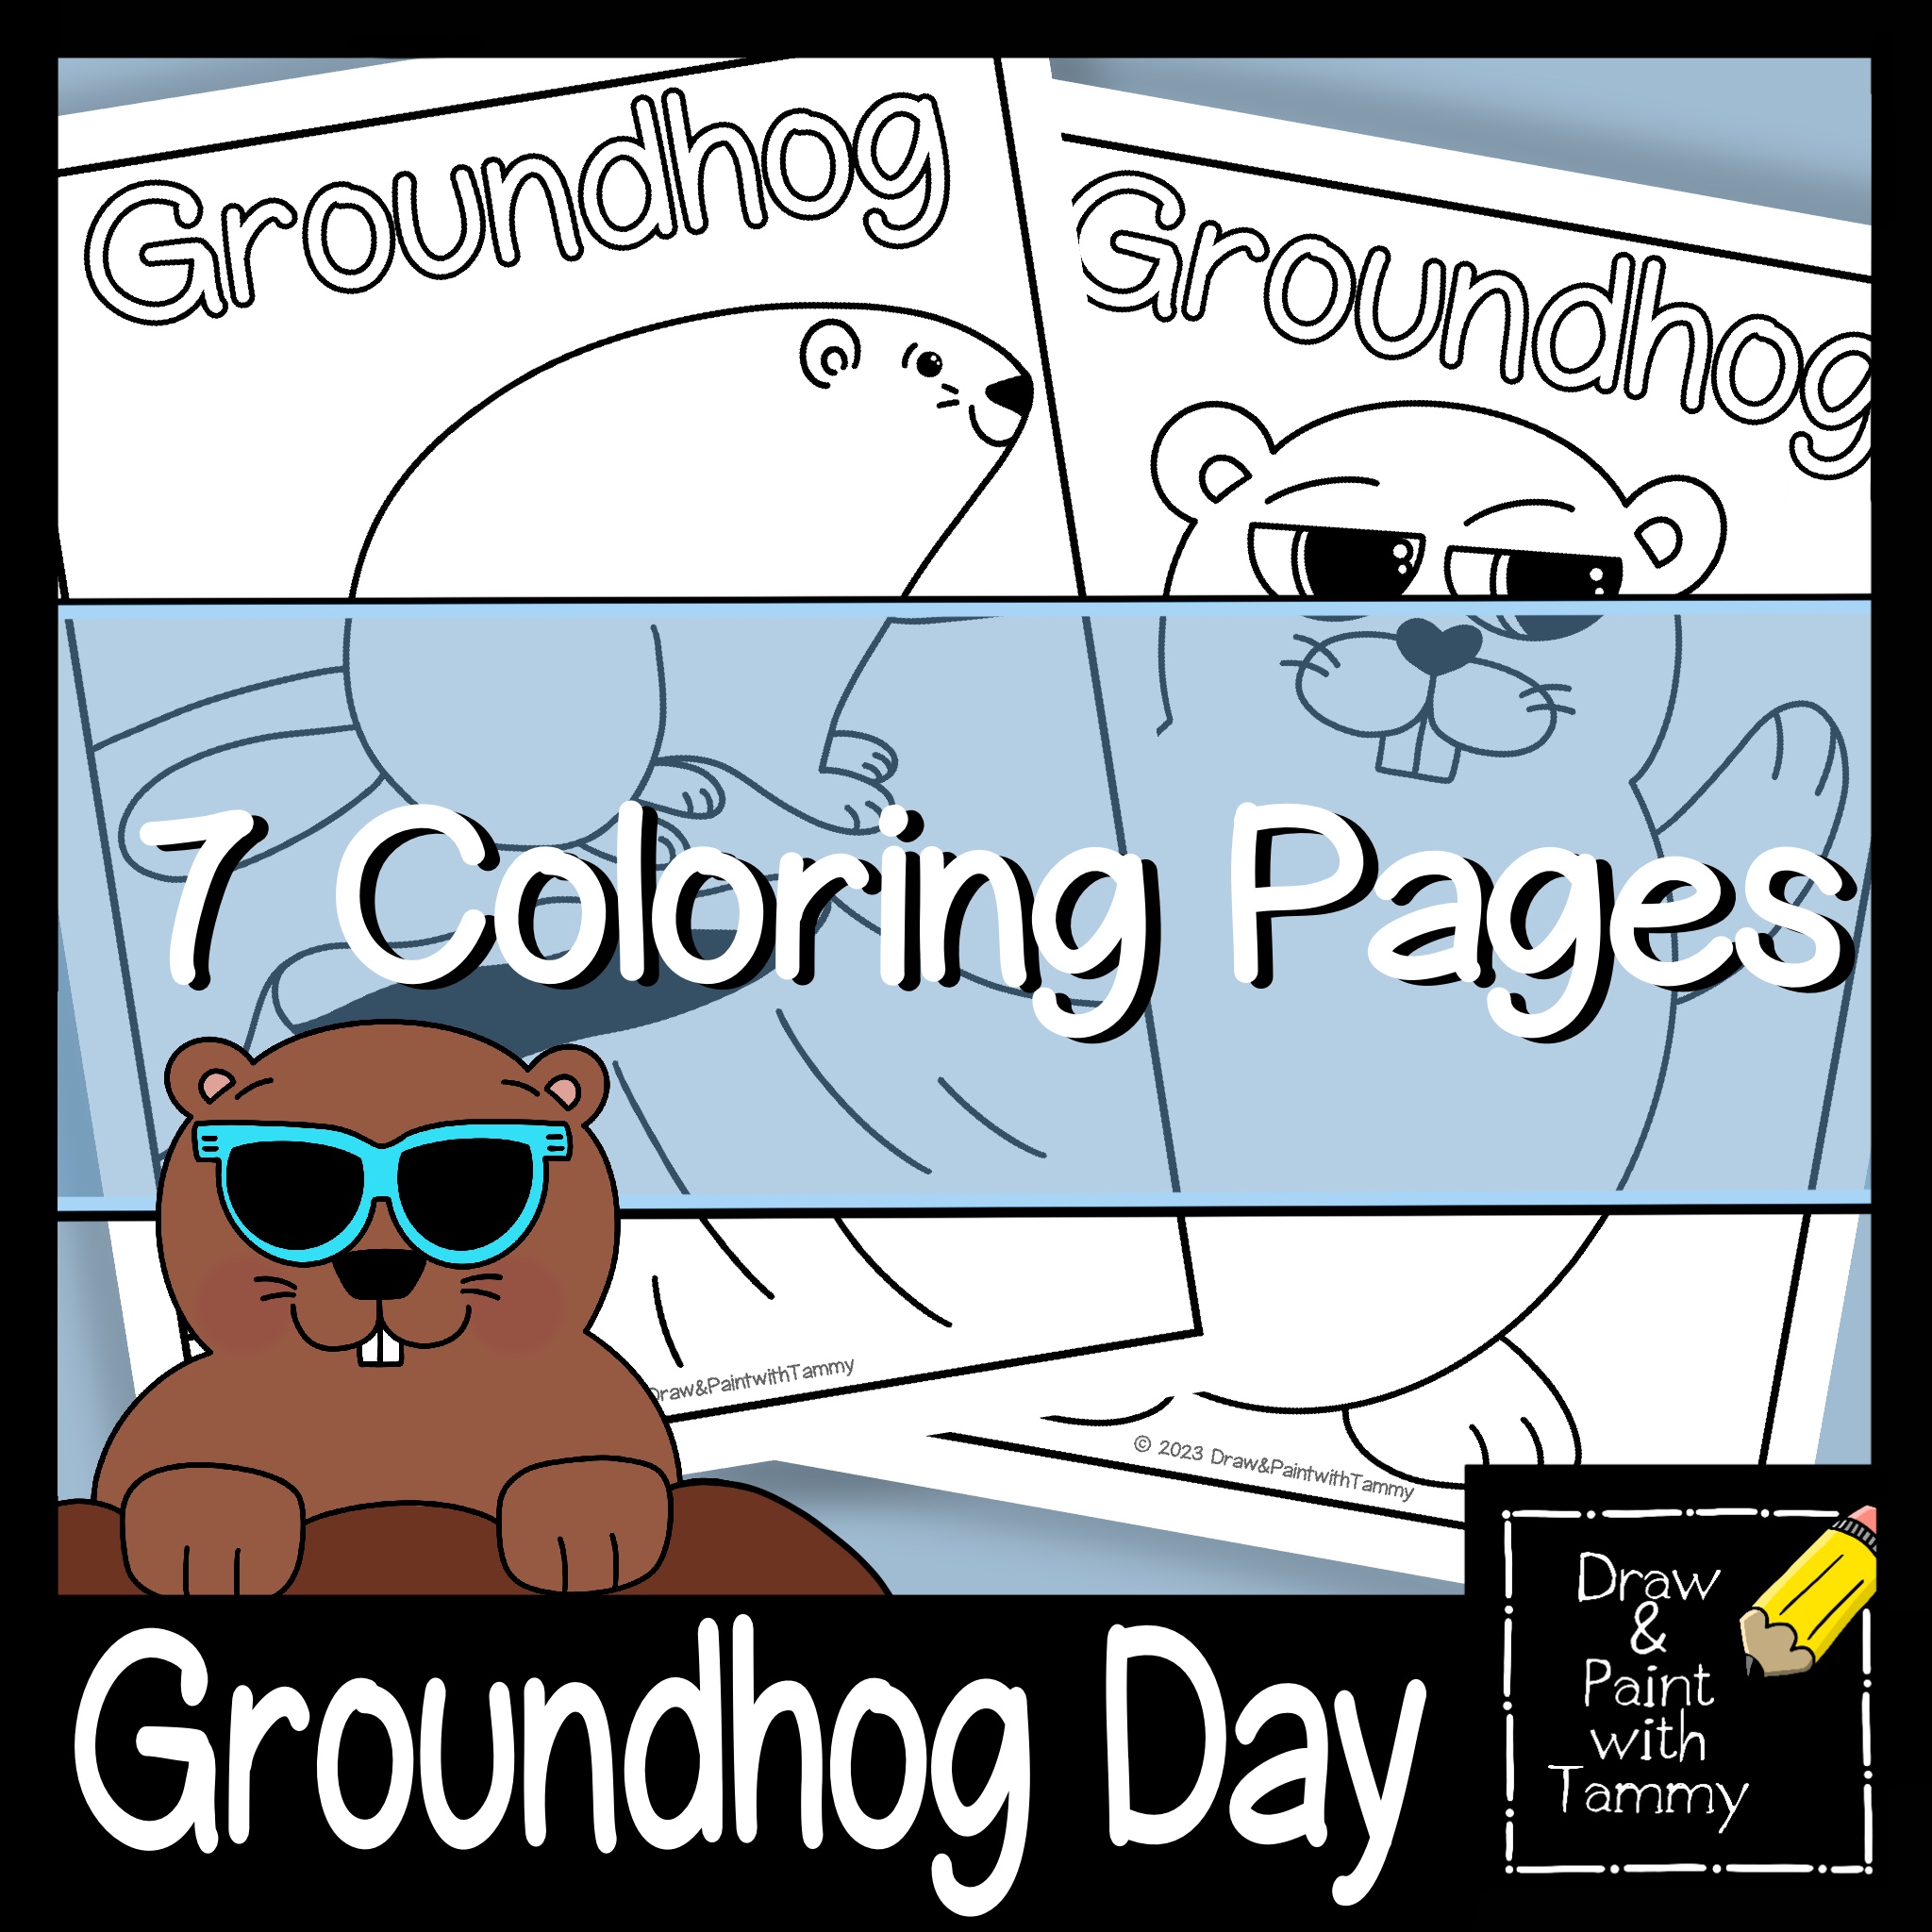 Groundhog day theme february printable coloring pages made by teachers